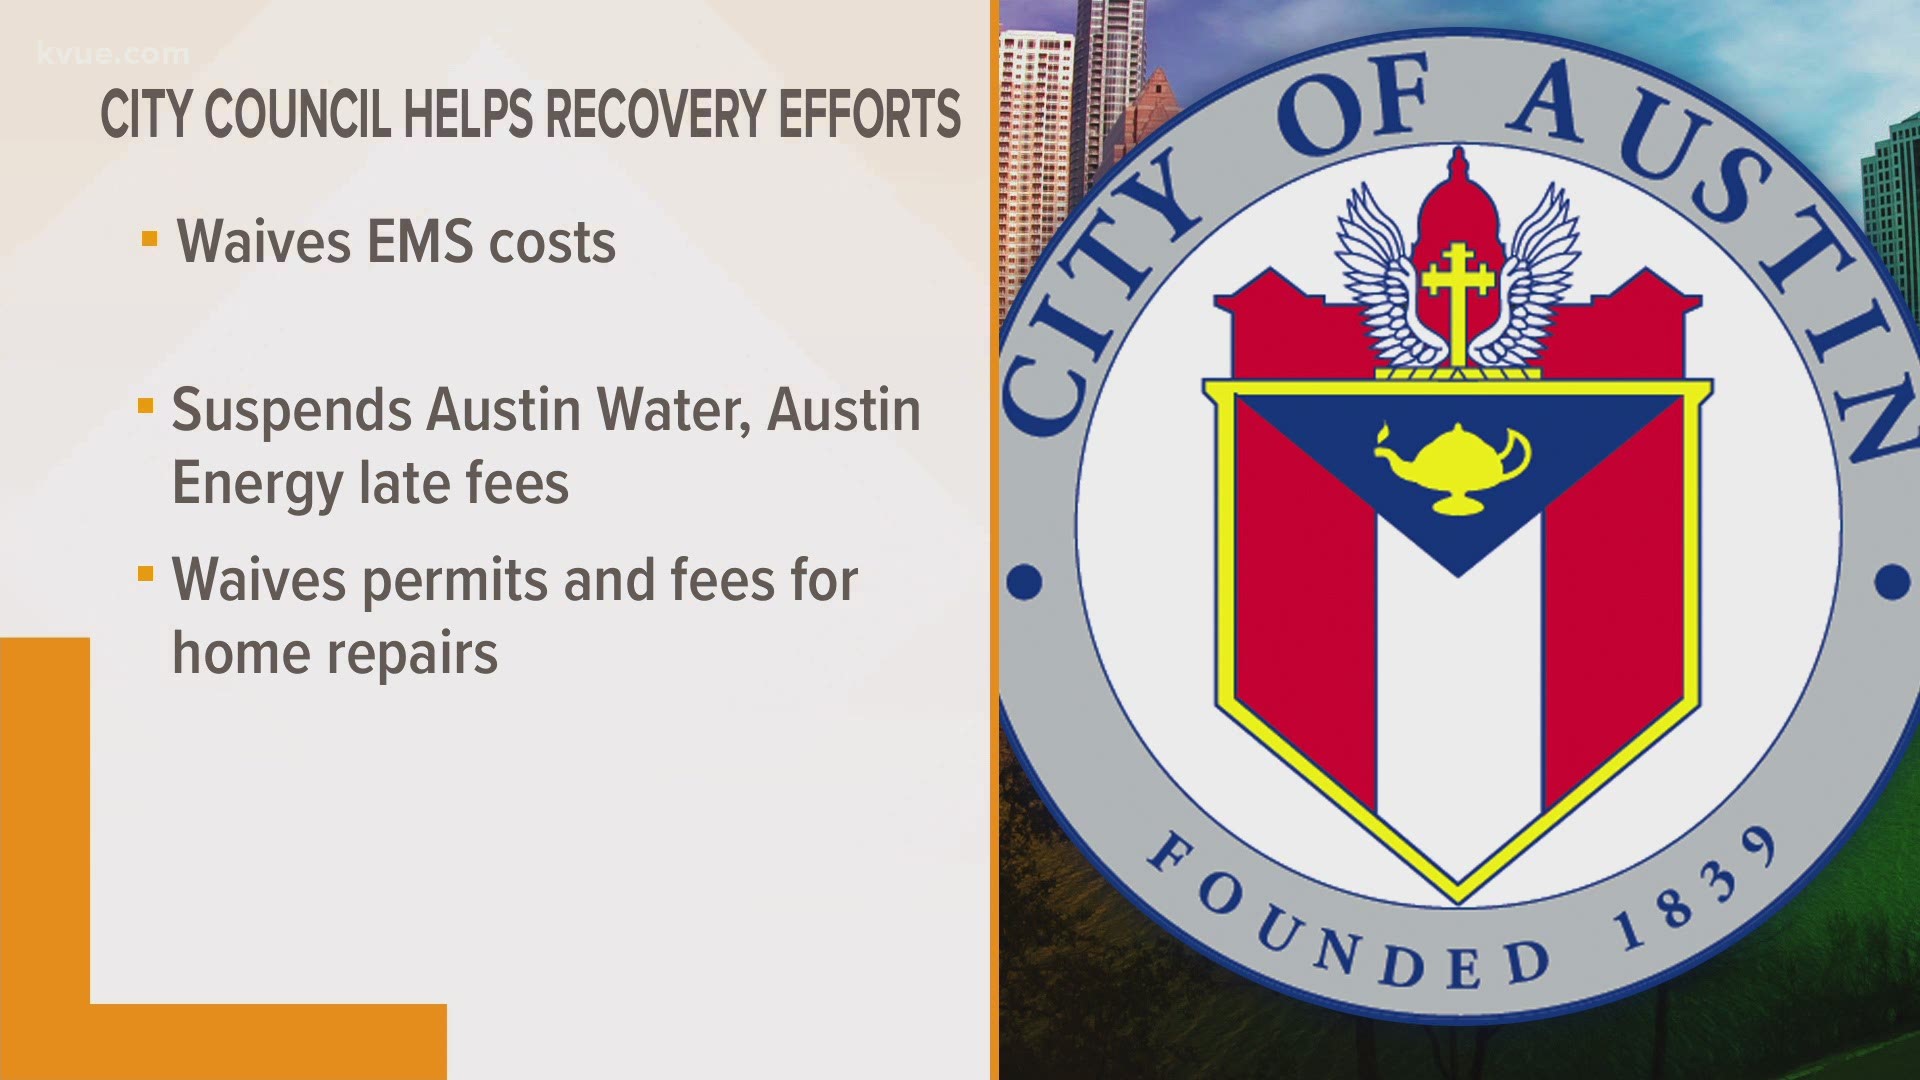 The Austin City Council passed a resolution to waive costs for people who received EMS help during the winter storms.